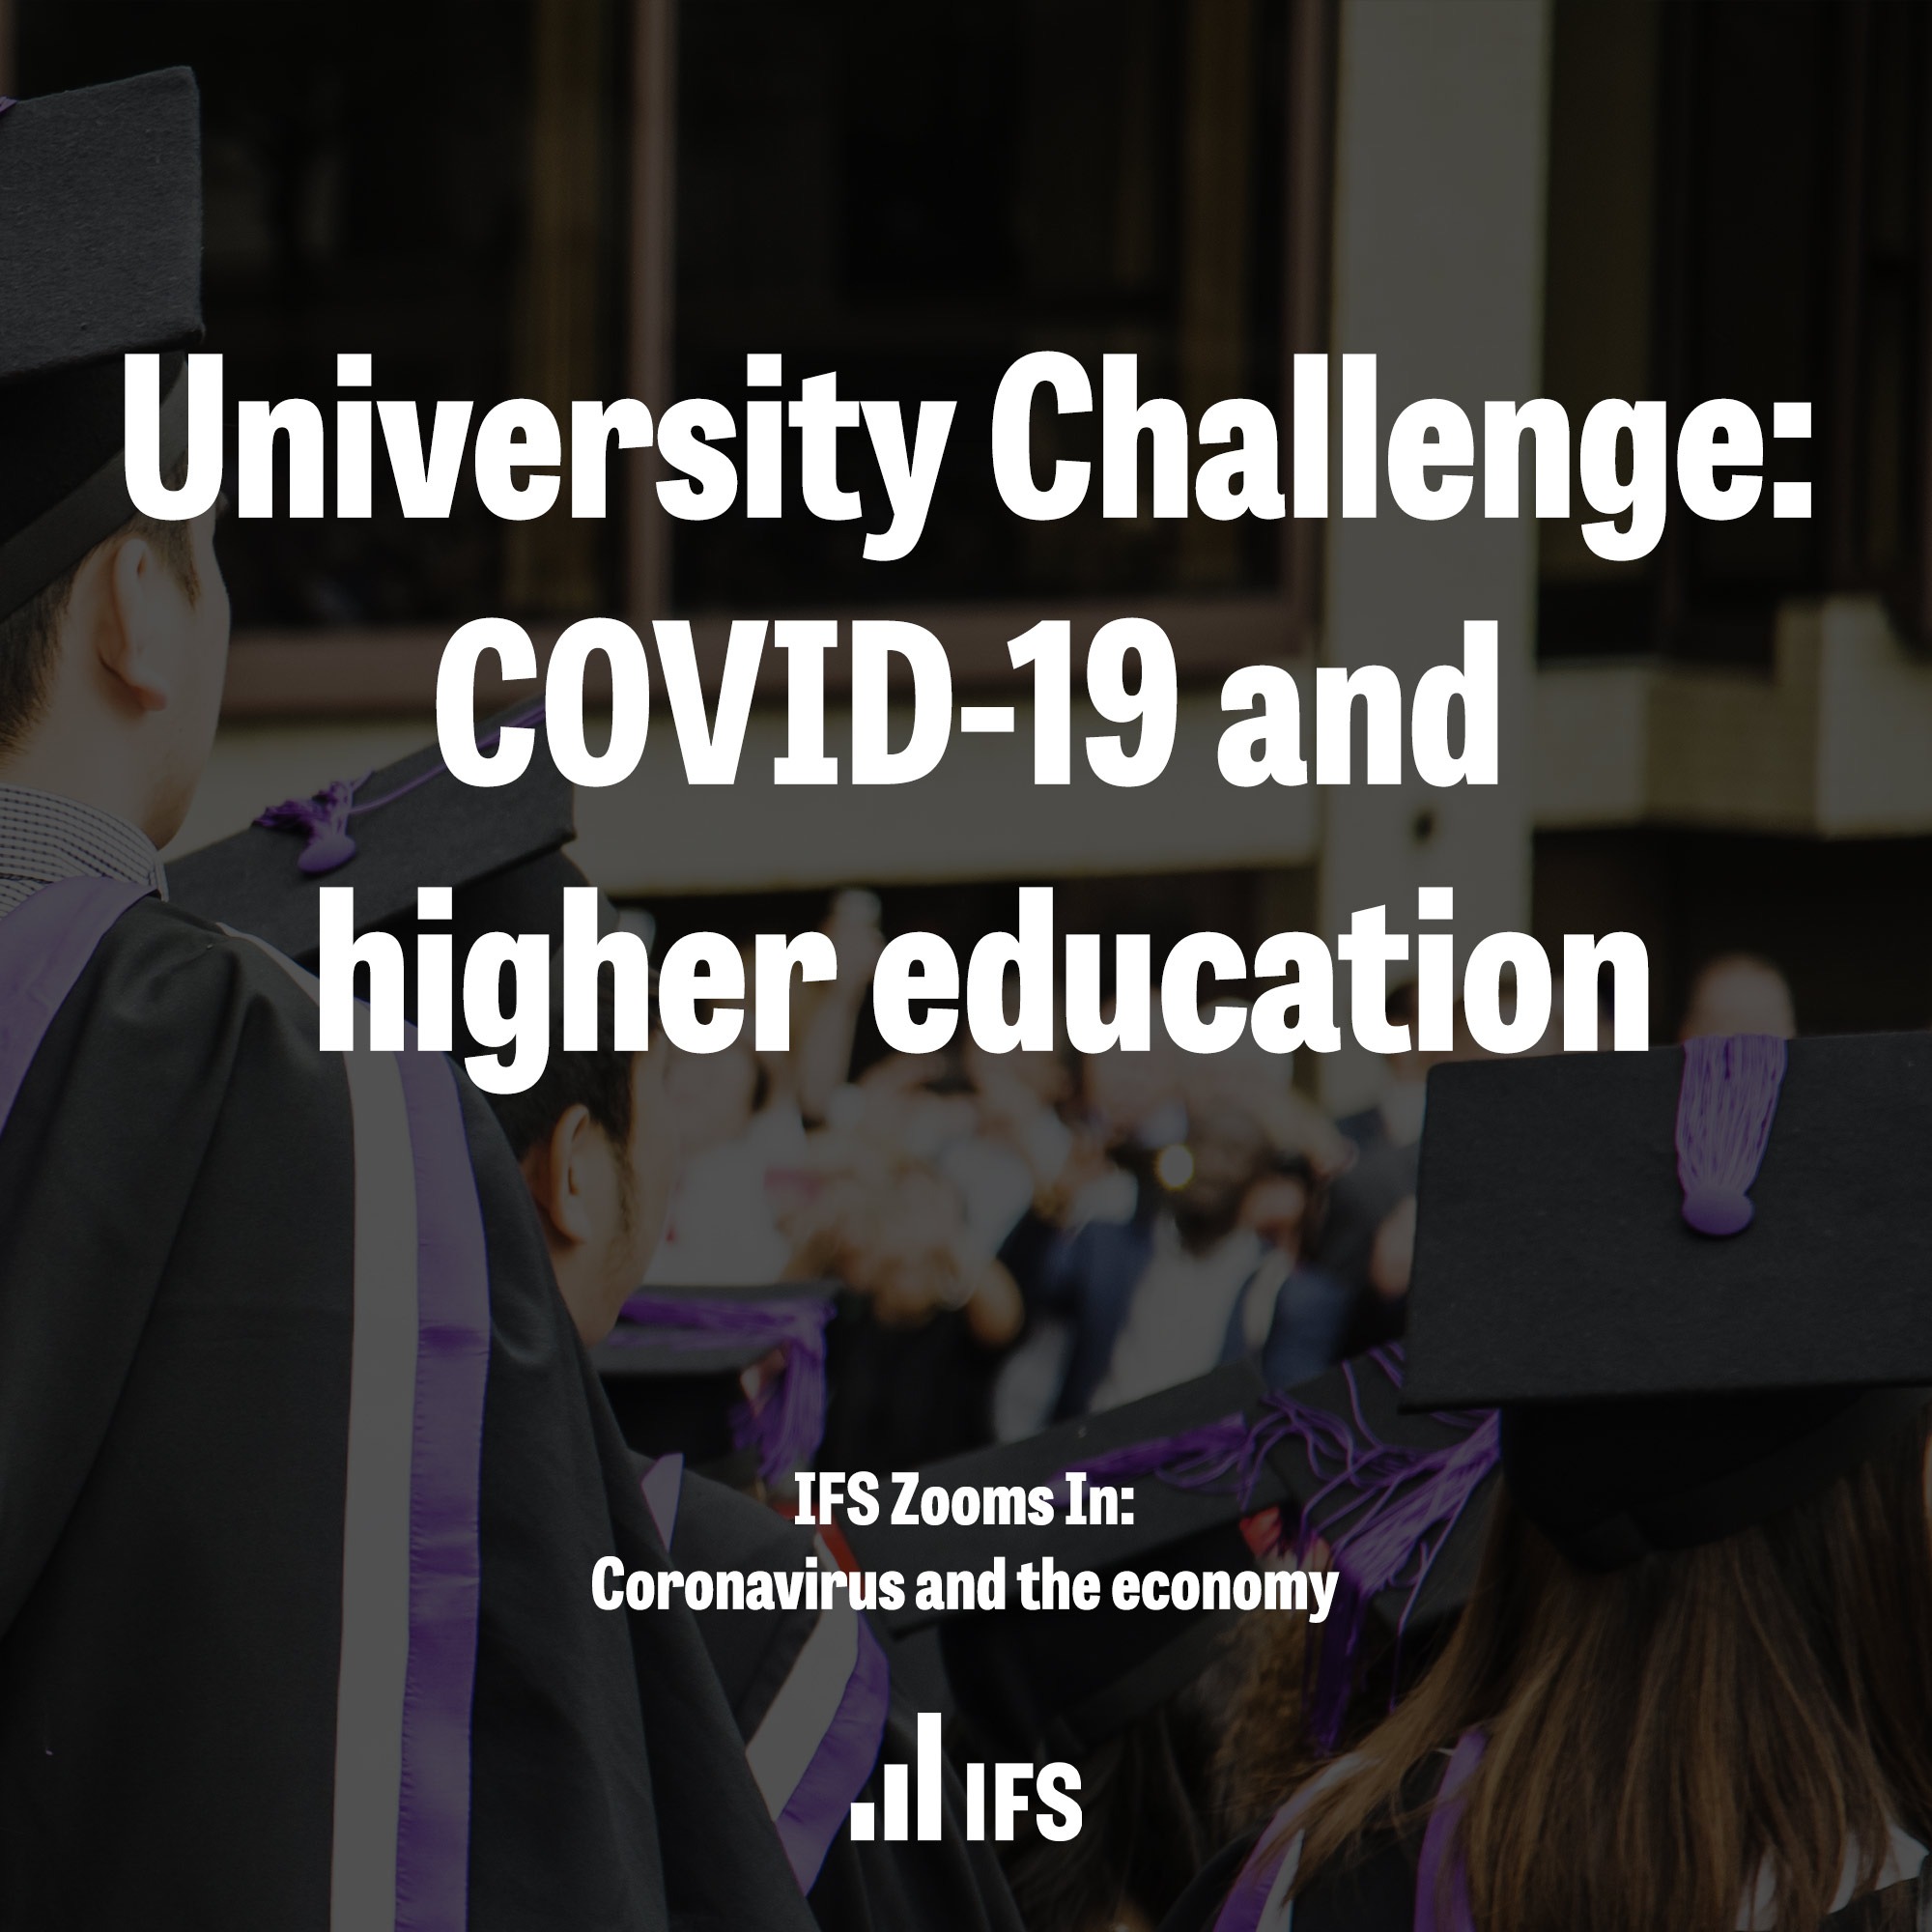 University Challenge: COVID-19 and higher education